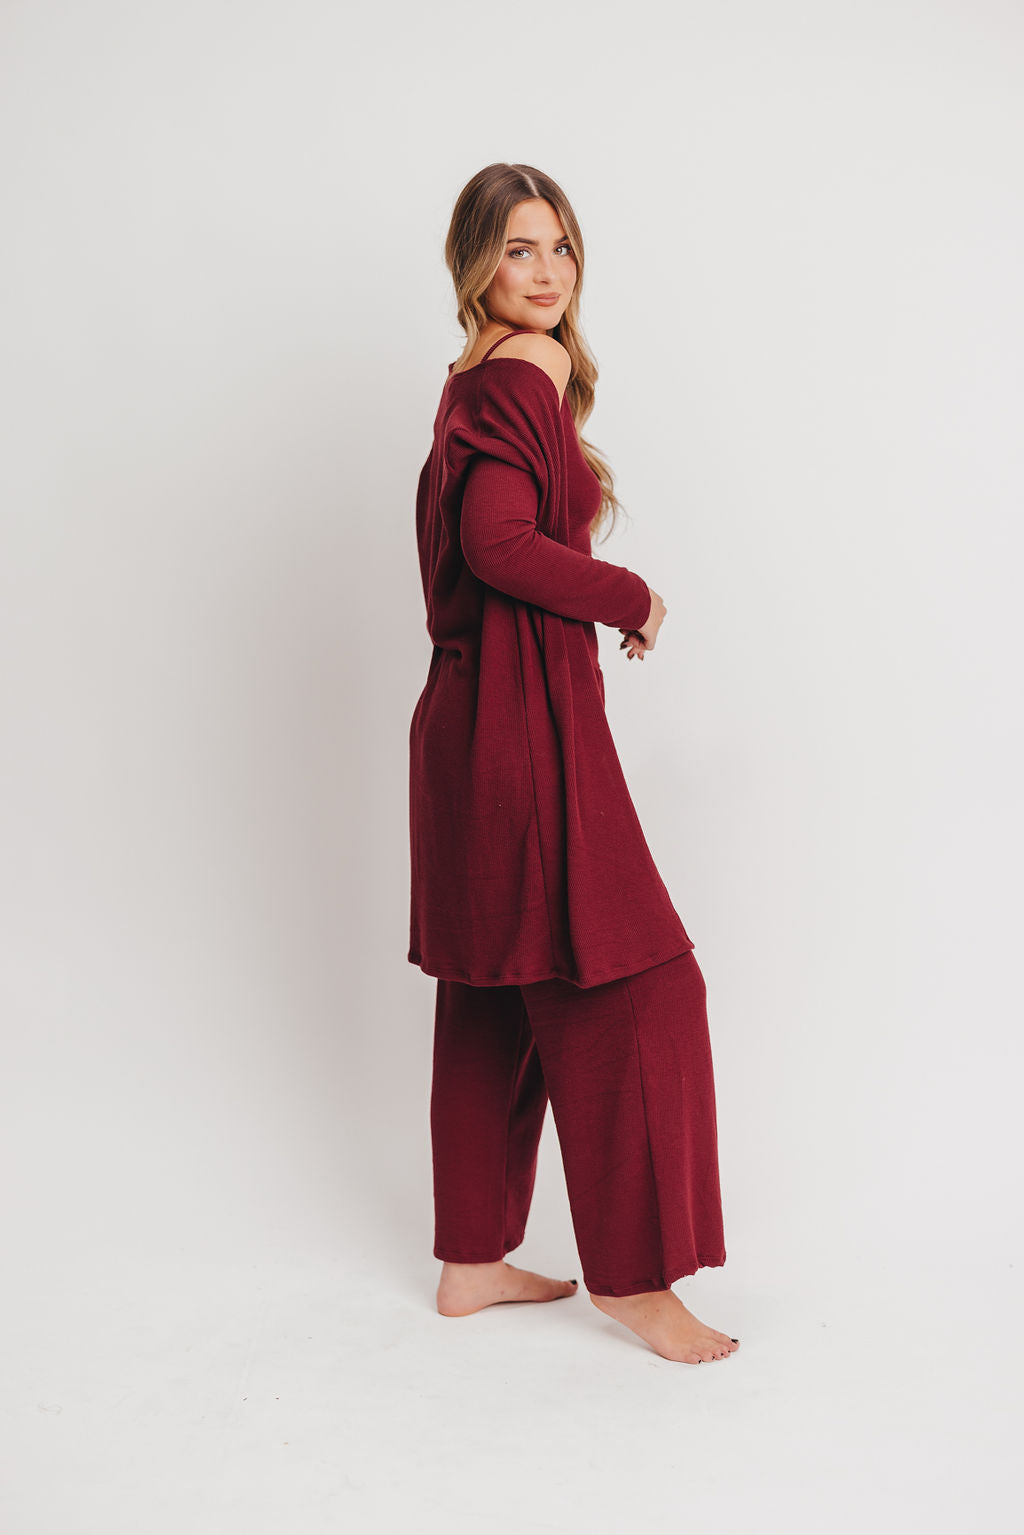 Betsy Ribbed Cardigan in Burgundy - Inclusive Sizing (S-2X)